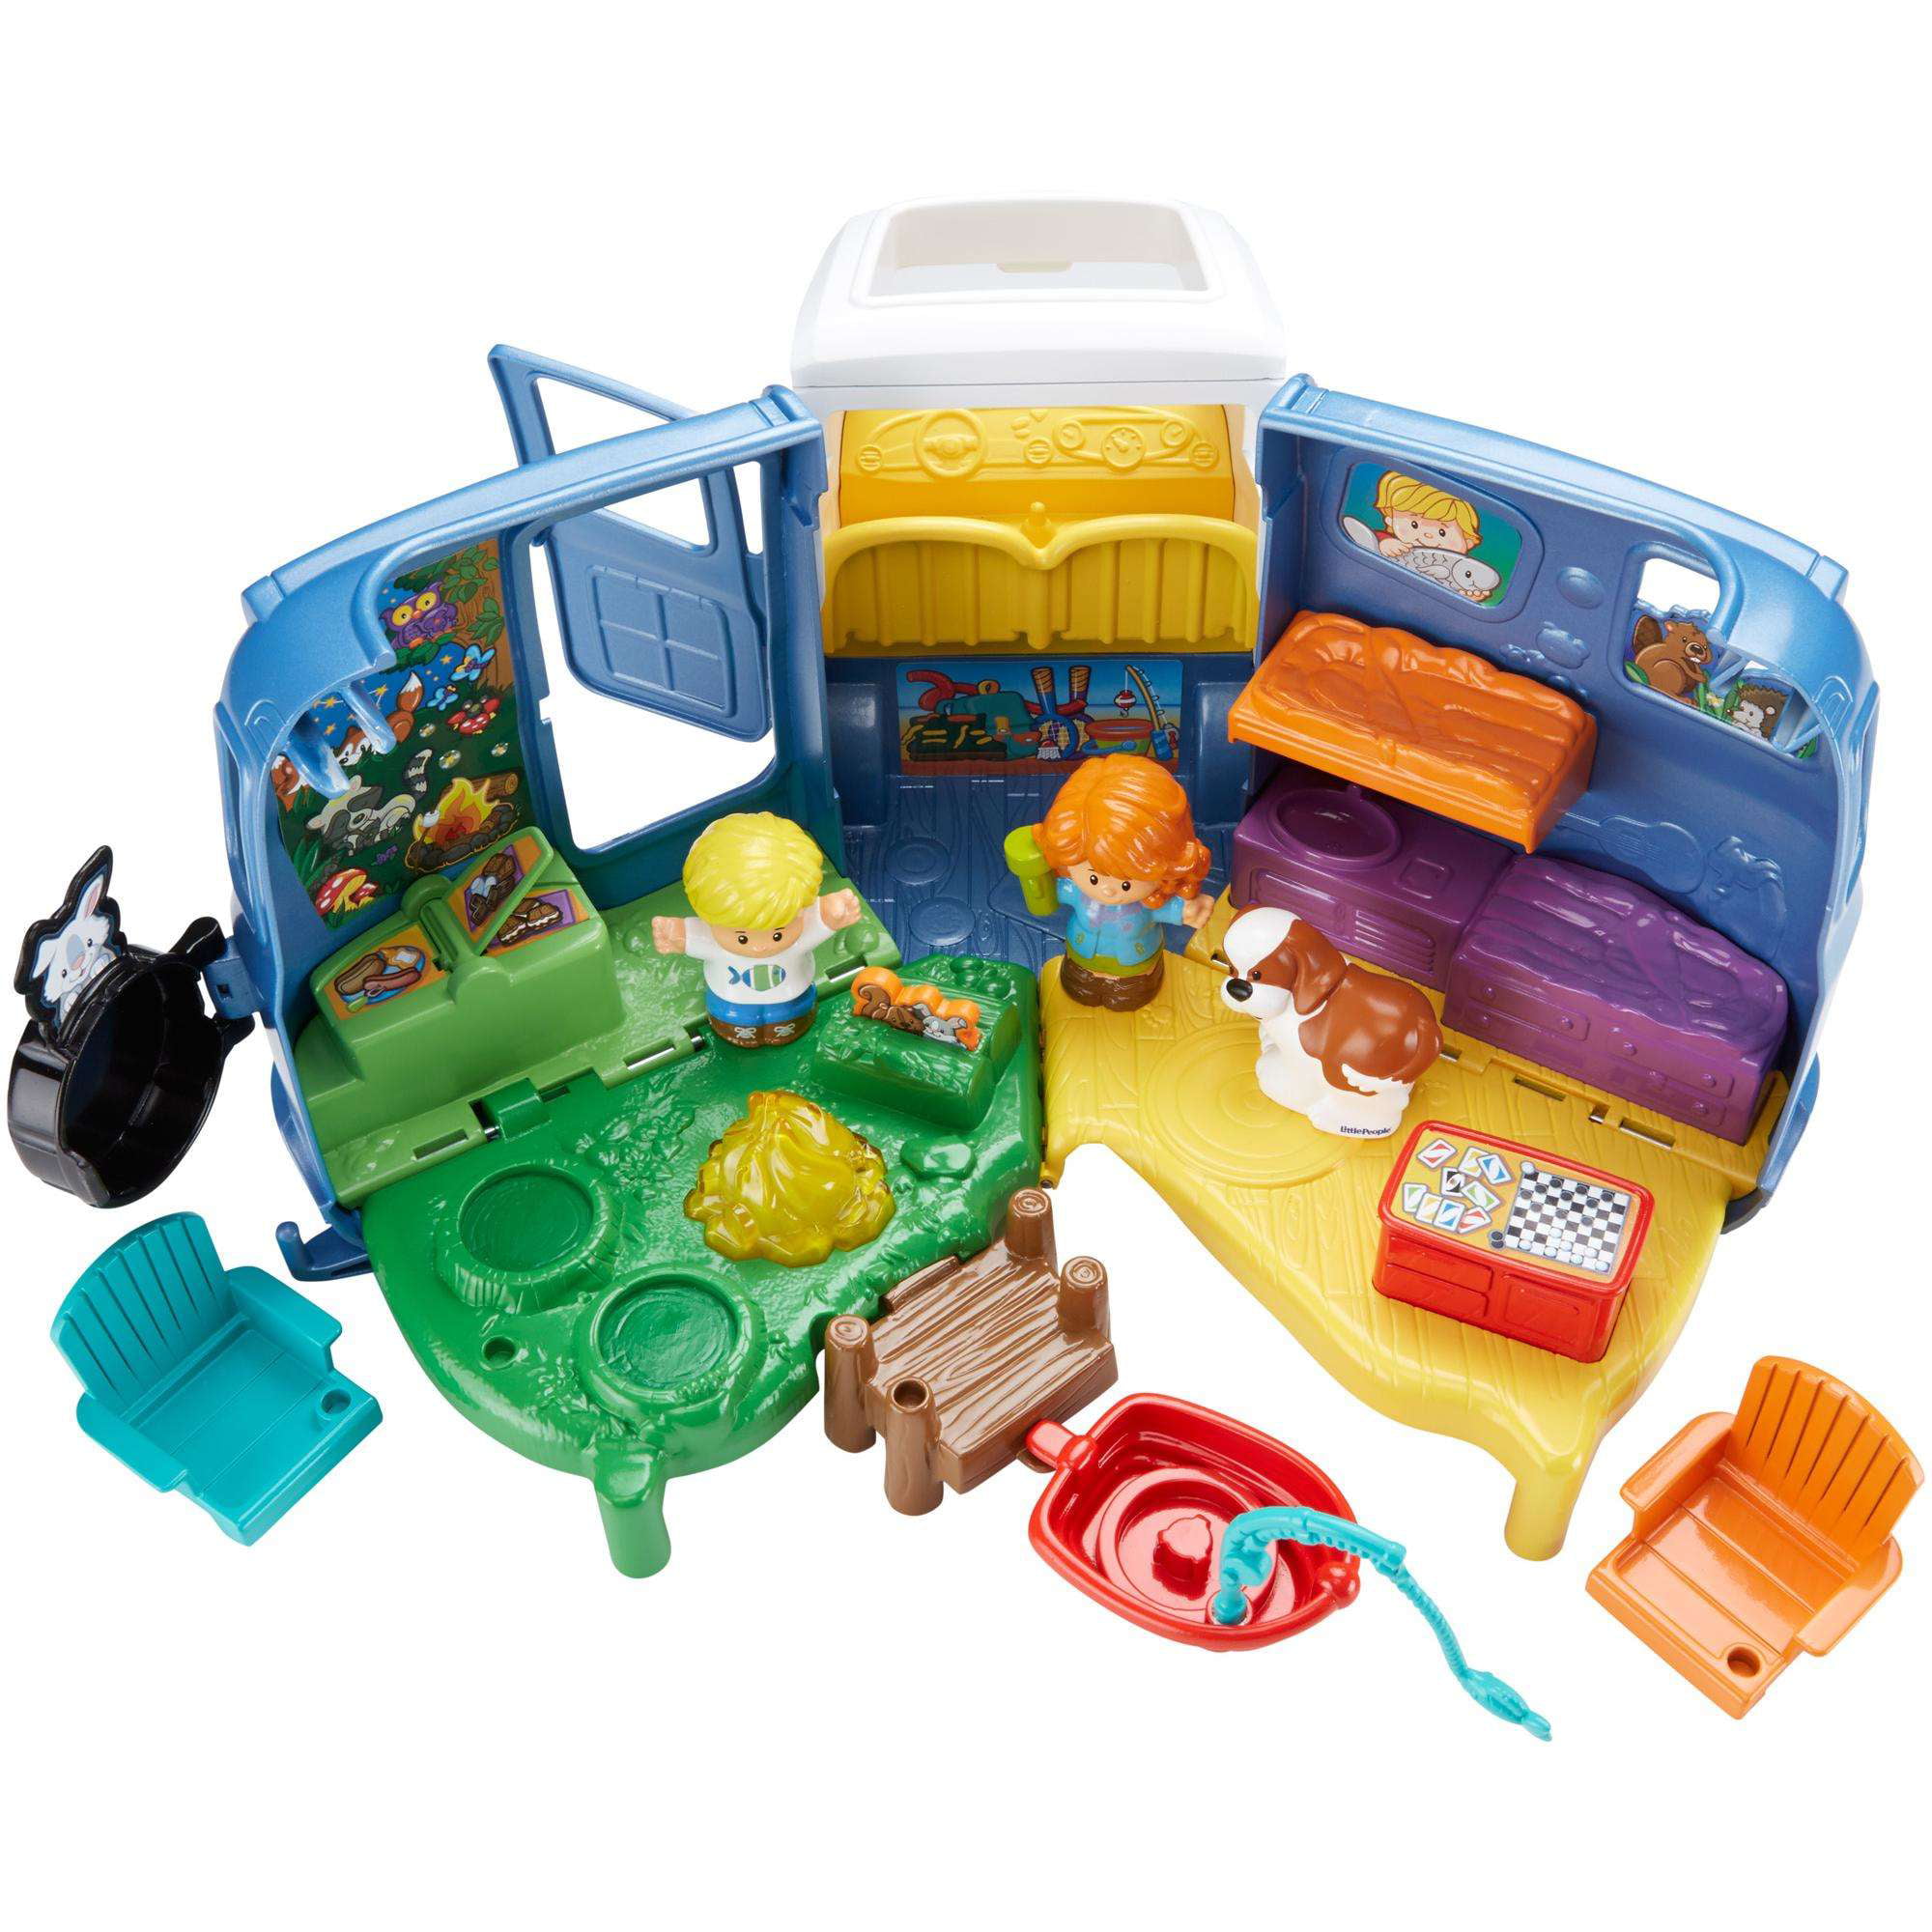 Fisher-Price DFV78 Little People Songs & Sounds Camper Playset for sale online 